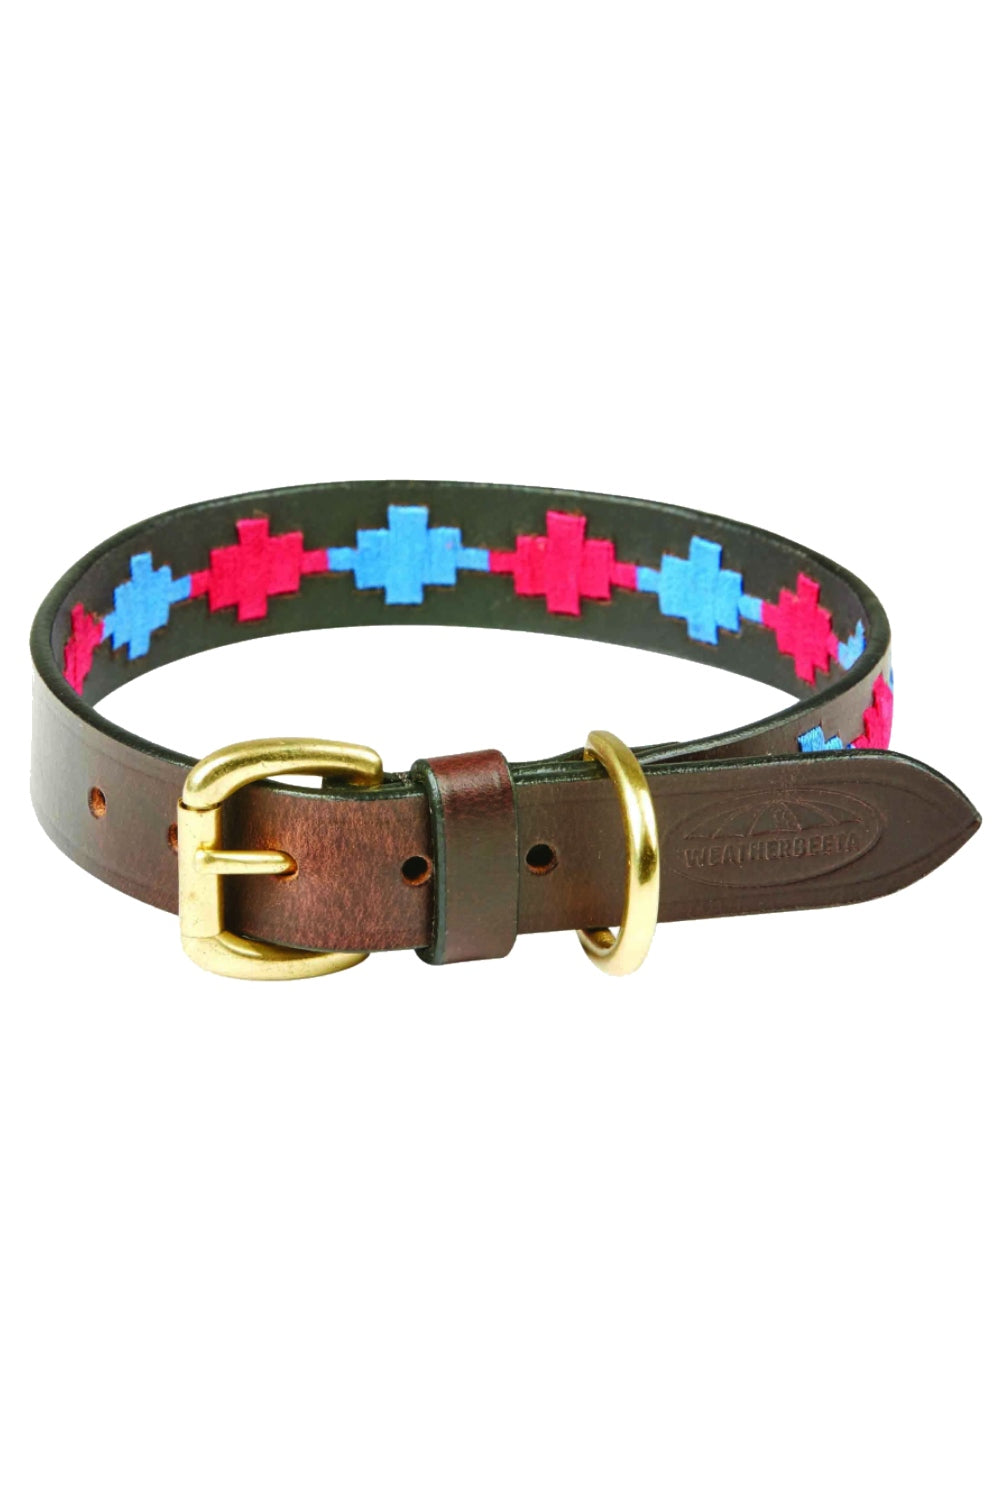 WeatherBeeta Polo Leather Dog Collar in Beaufort Brown/Pink/Blue 